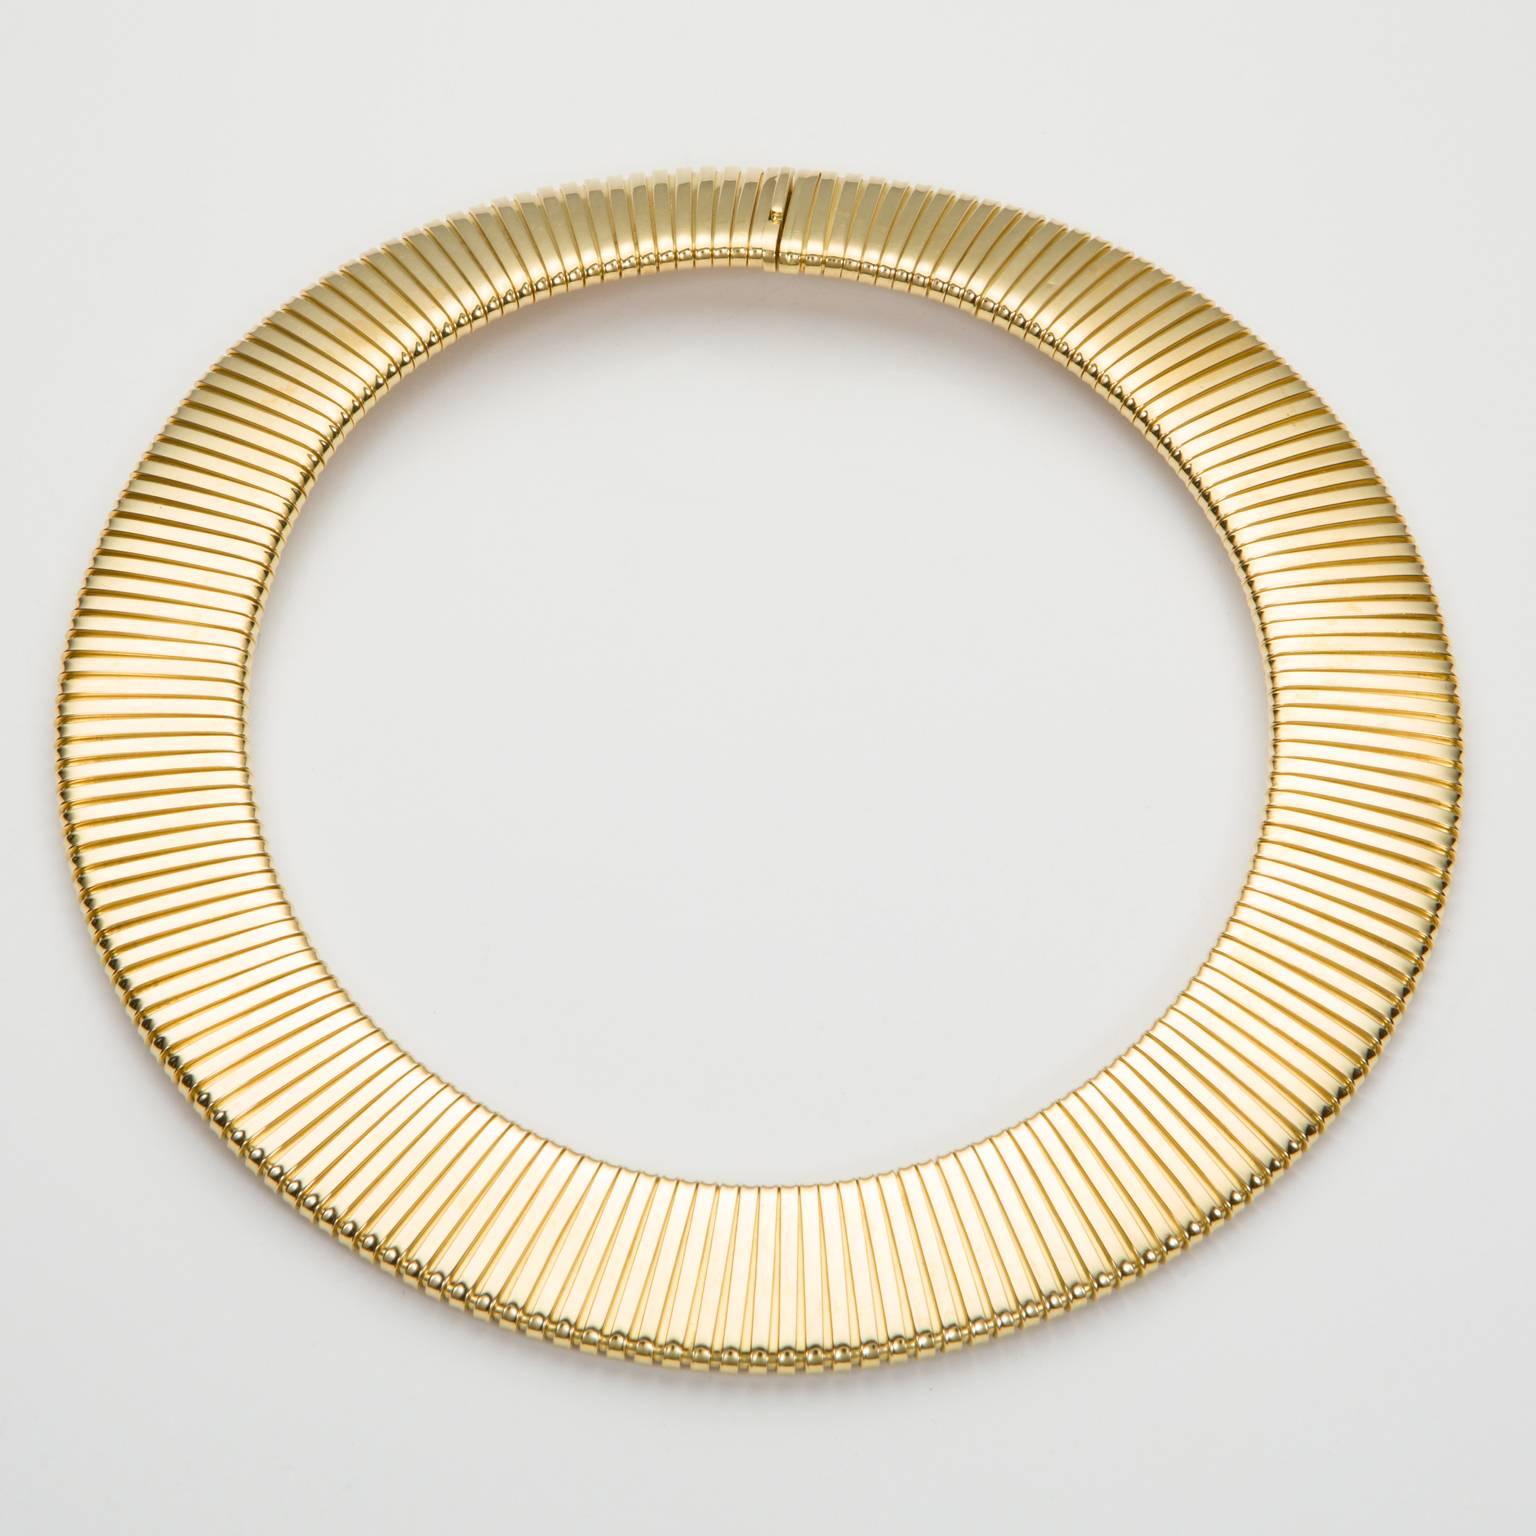 This stunning collar necklace is everything! Cleopatra style, chic, elegant fluid gold caressing your neck, it's a dream to wear and will be a very special addition to your jewellery wardrobe. 
Tubogas work is so detailed with subtle flexibility